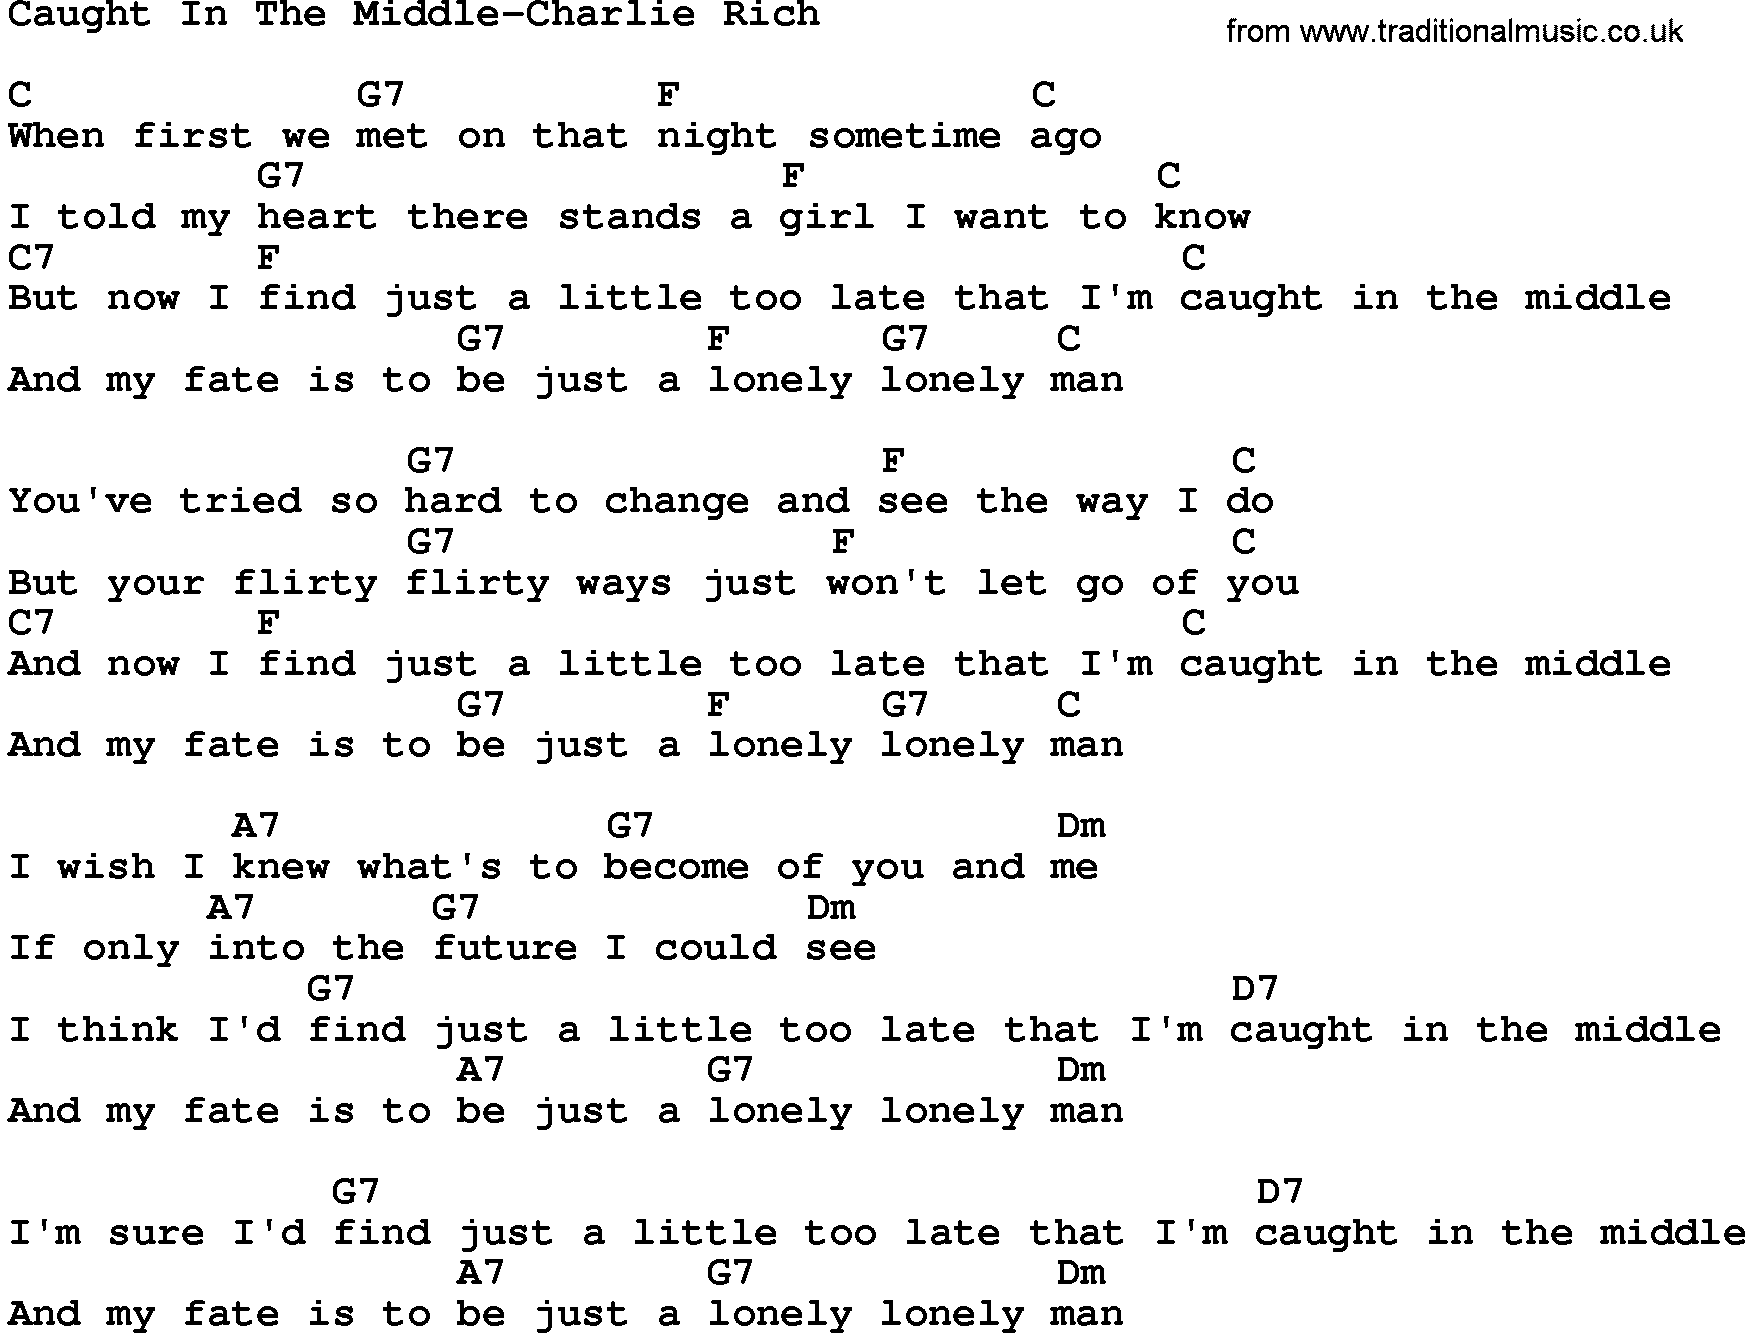 Country music song: Caught In The Middle-Charlie Rich lyrics and chords